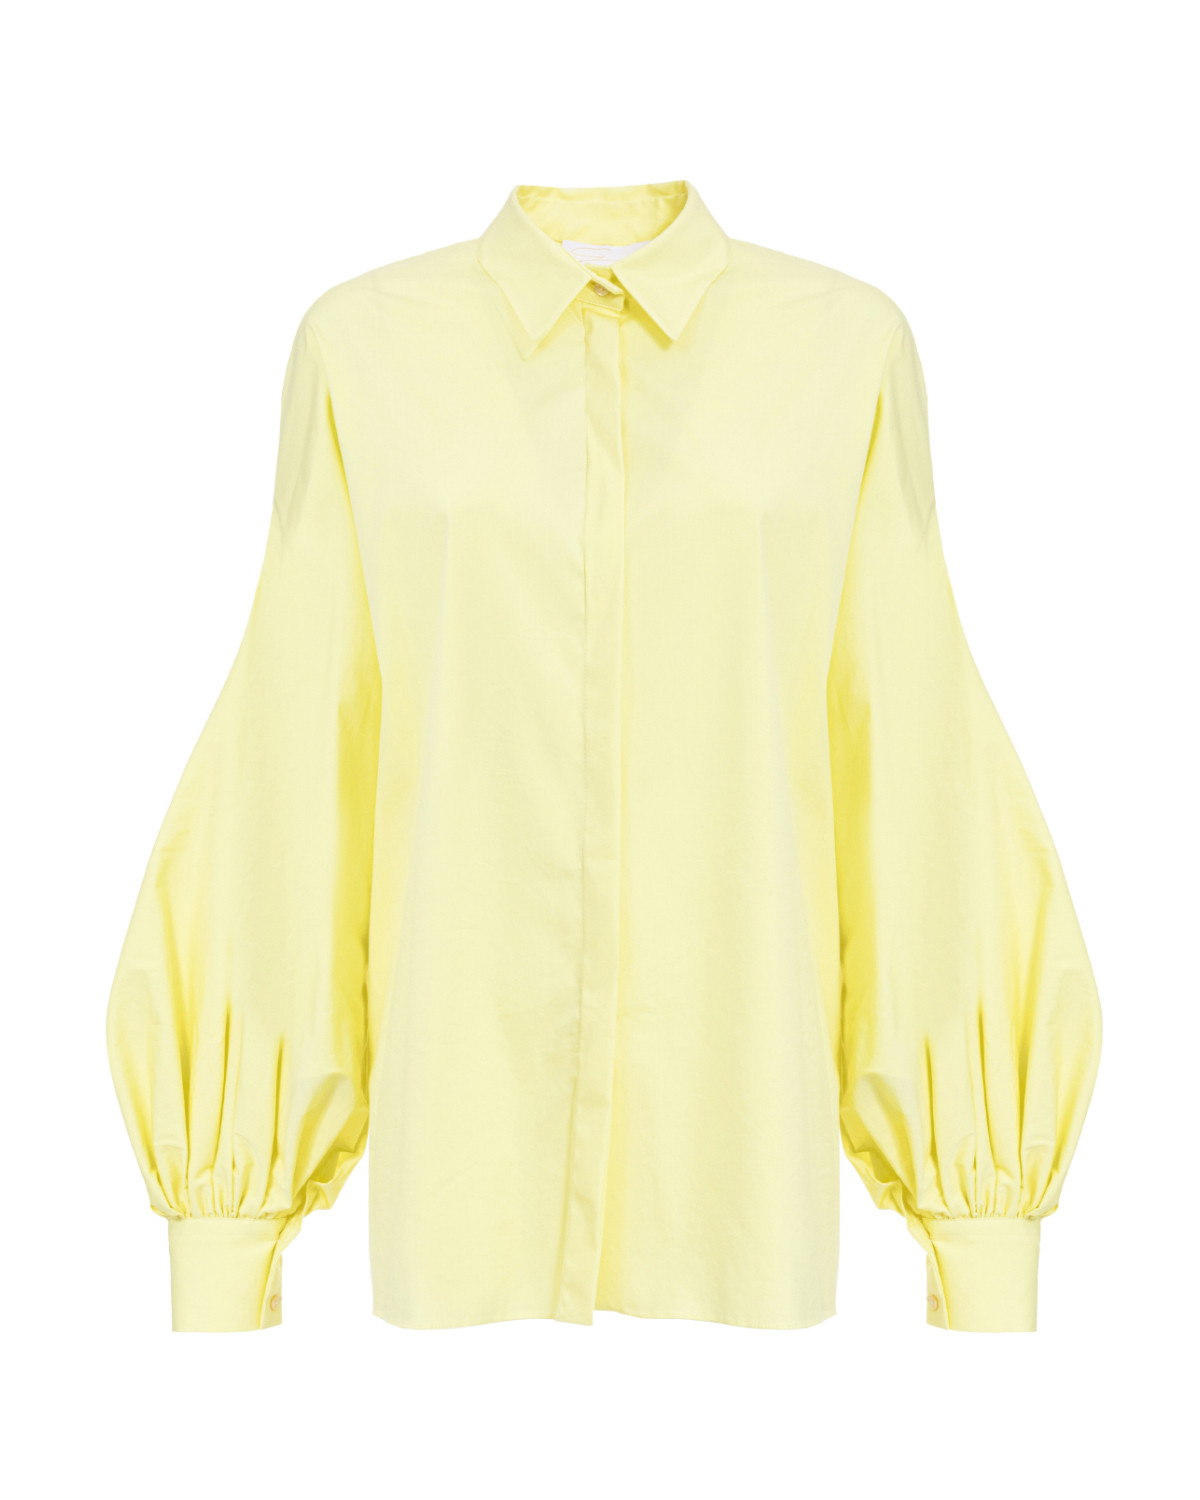 Light yellow cotton blouse with wide sleeves